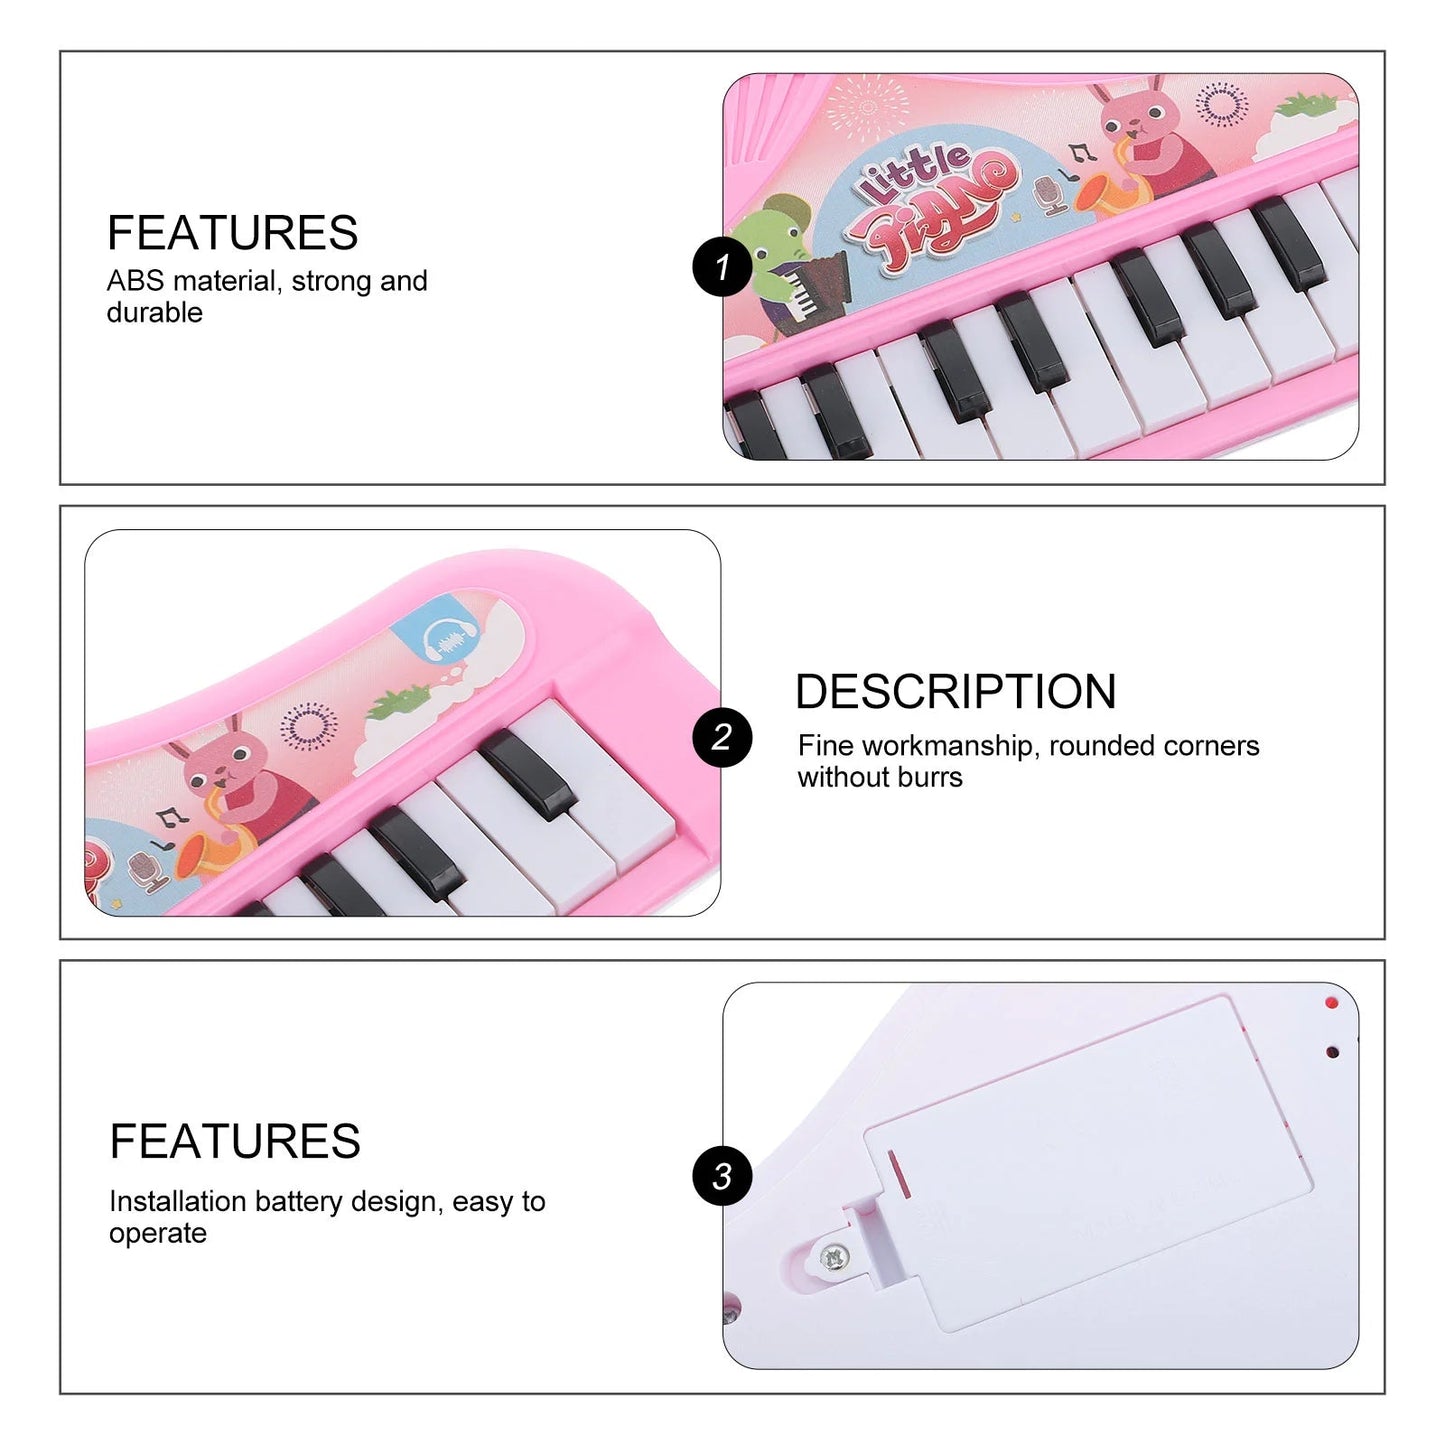 Musical Instruments Toddlers 1- 3 Electronic Organ Toys Keyboard